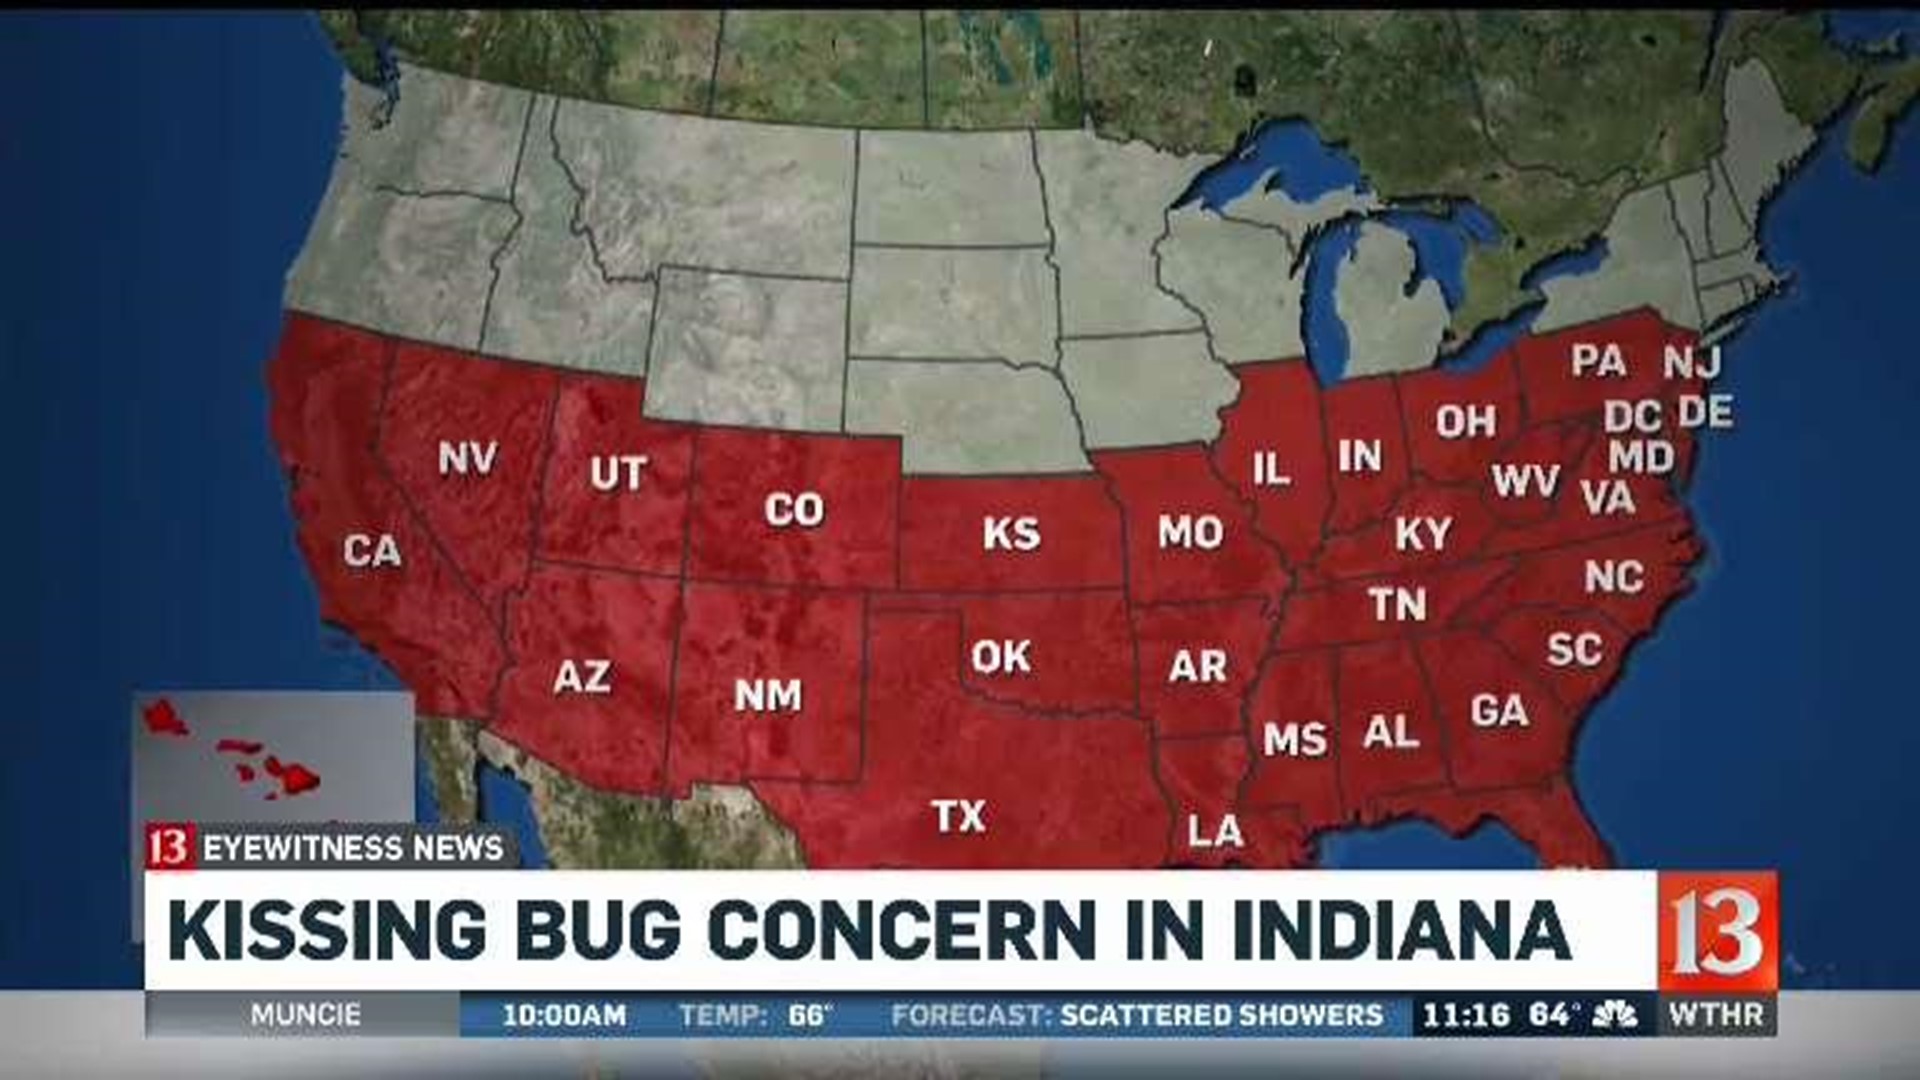 Kissing Bug Concern in Indiana